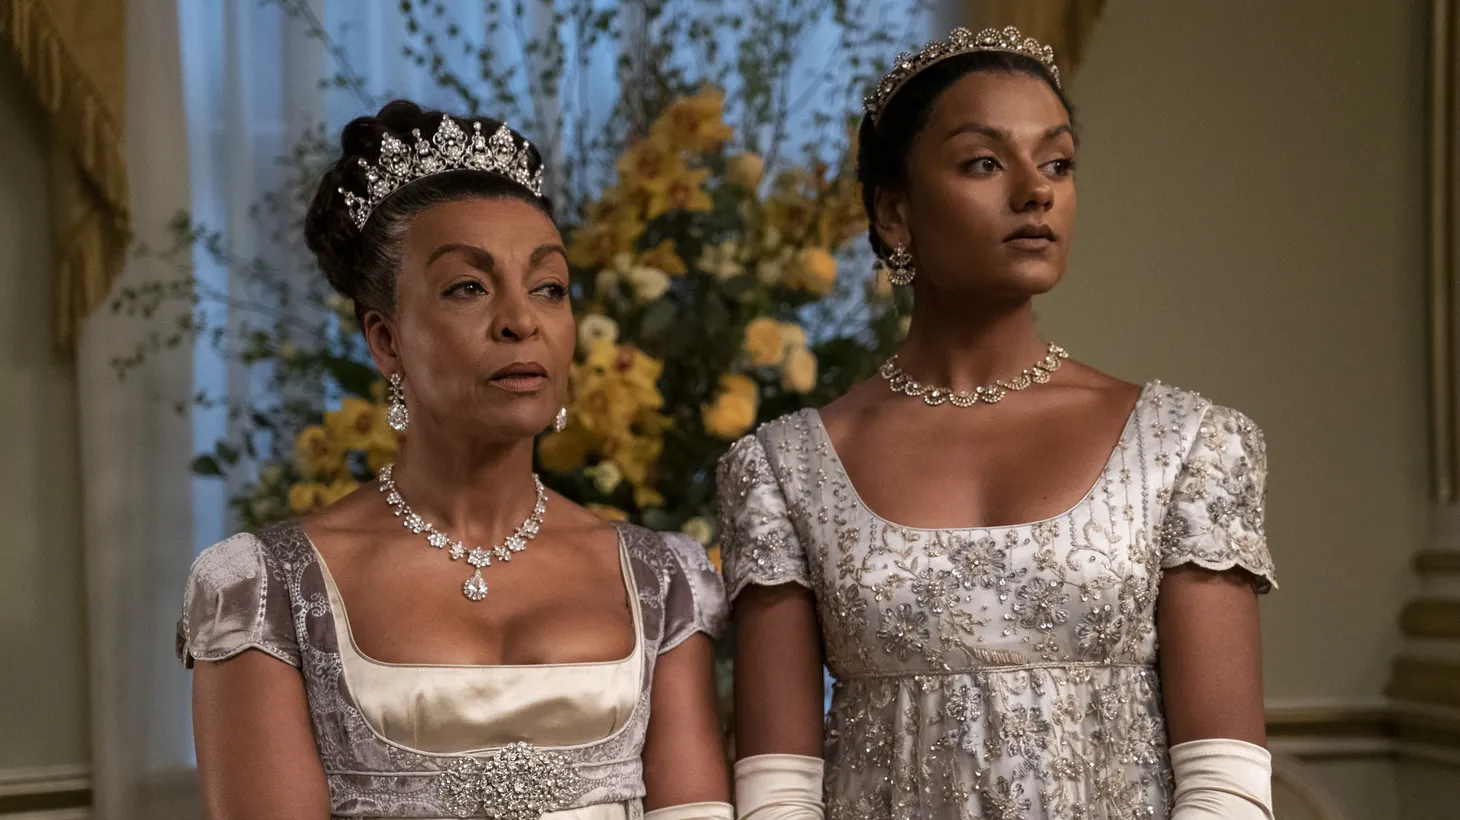 "Bridgerton” season two features new leads plus drop-ins from past characters. L to R: Adjoa Andoh as Lady Danbury and Simone Ashley as Kate Sharma.